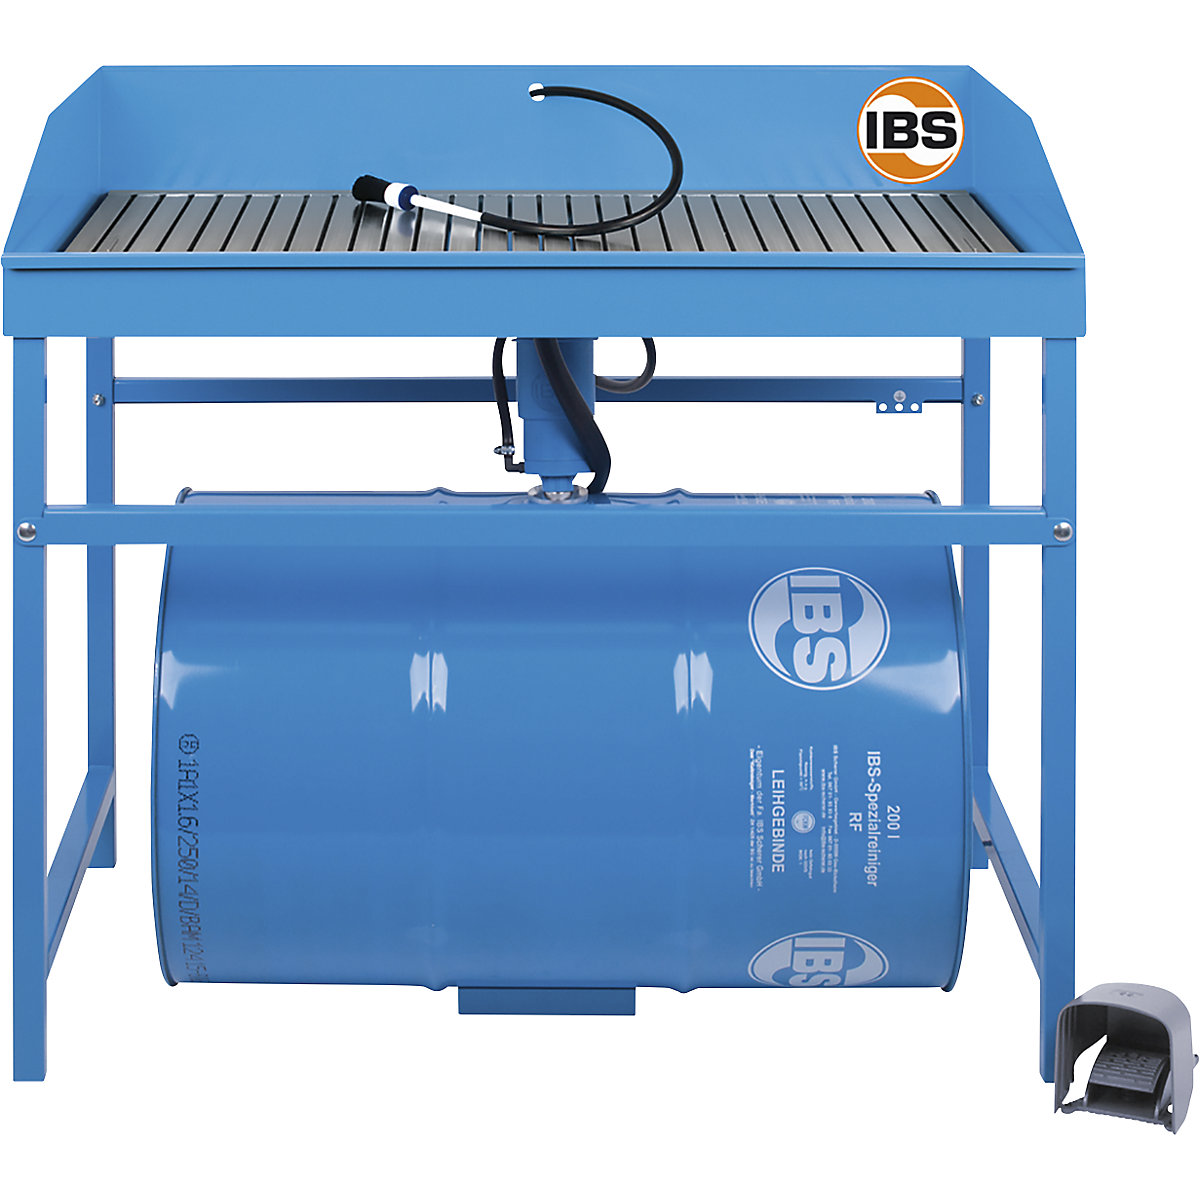 Mobile small parts cleaner – IBS Scherer: complete set with 50 l of special  cleaner